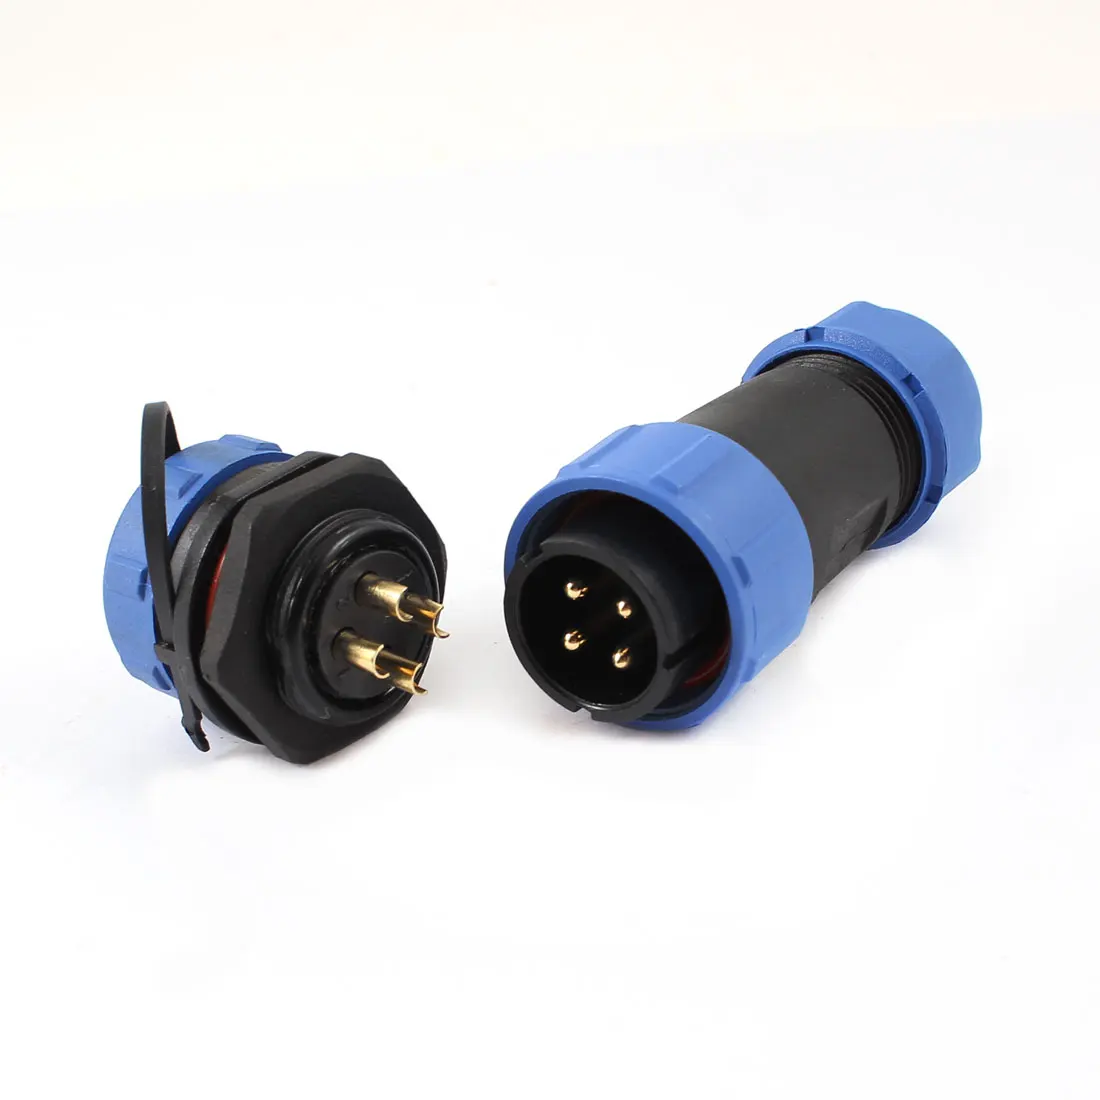 

Ac 500V 30A 21Mm Panel Mount Thread Hole Cable Gland 4 Pin Terminal Connector Aviation Plug W Waterproof Cap